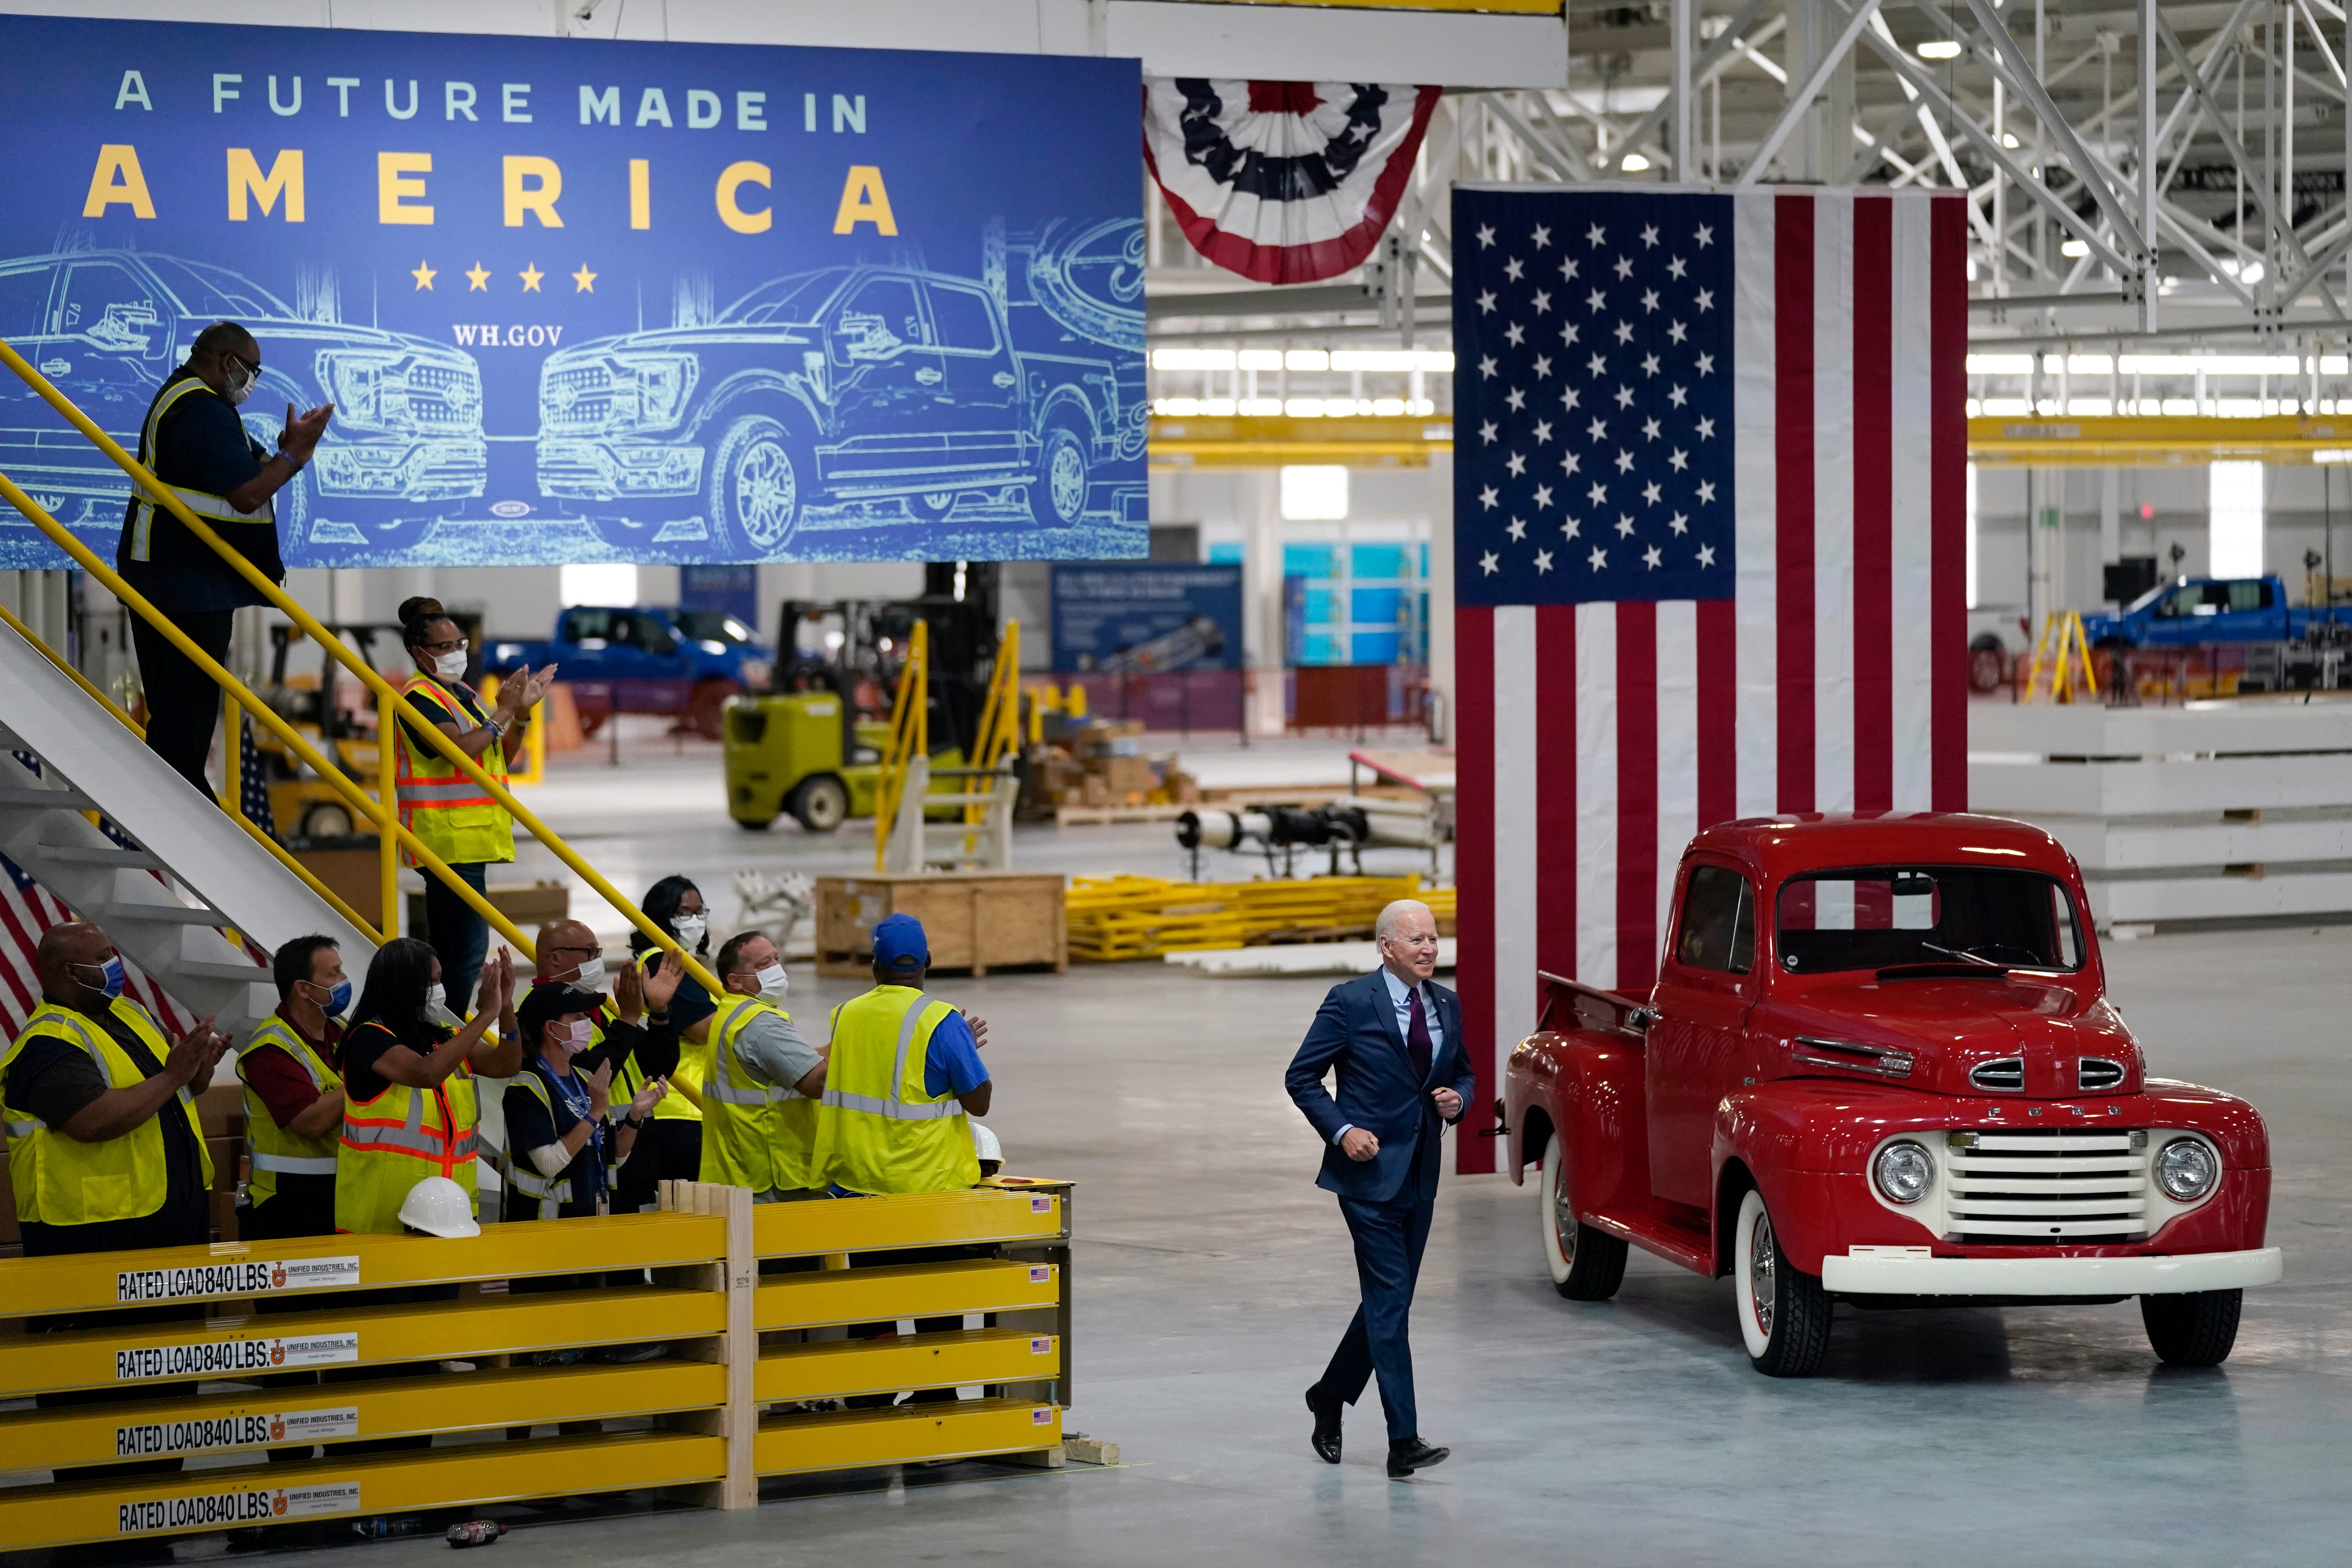 President Joe Biden arrives to speak after a tour of the Ford Rouge EV Center, Tuesday, May 18, 2021, in Dearborn, Mich.